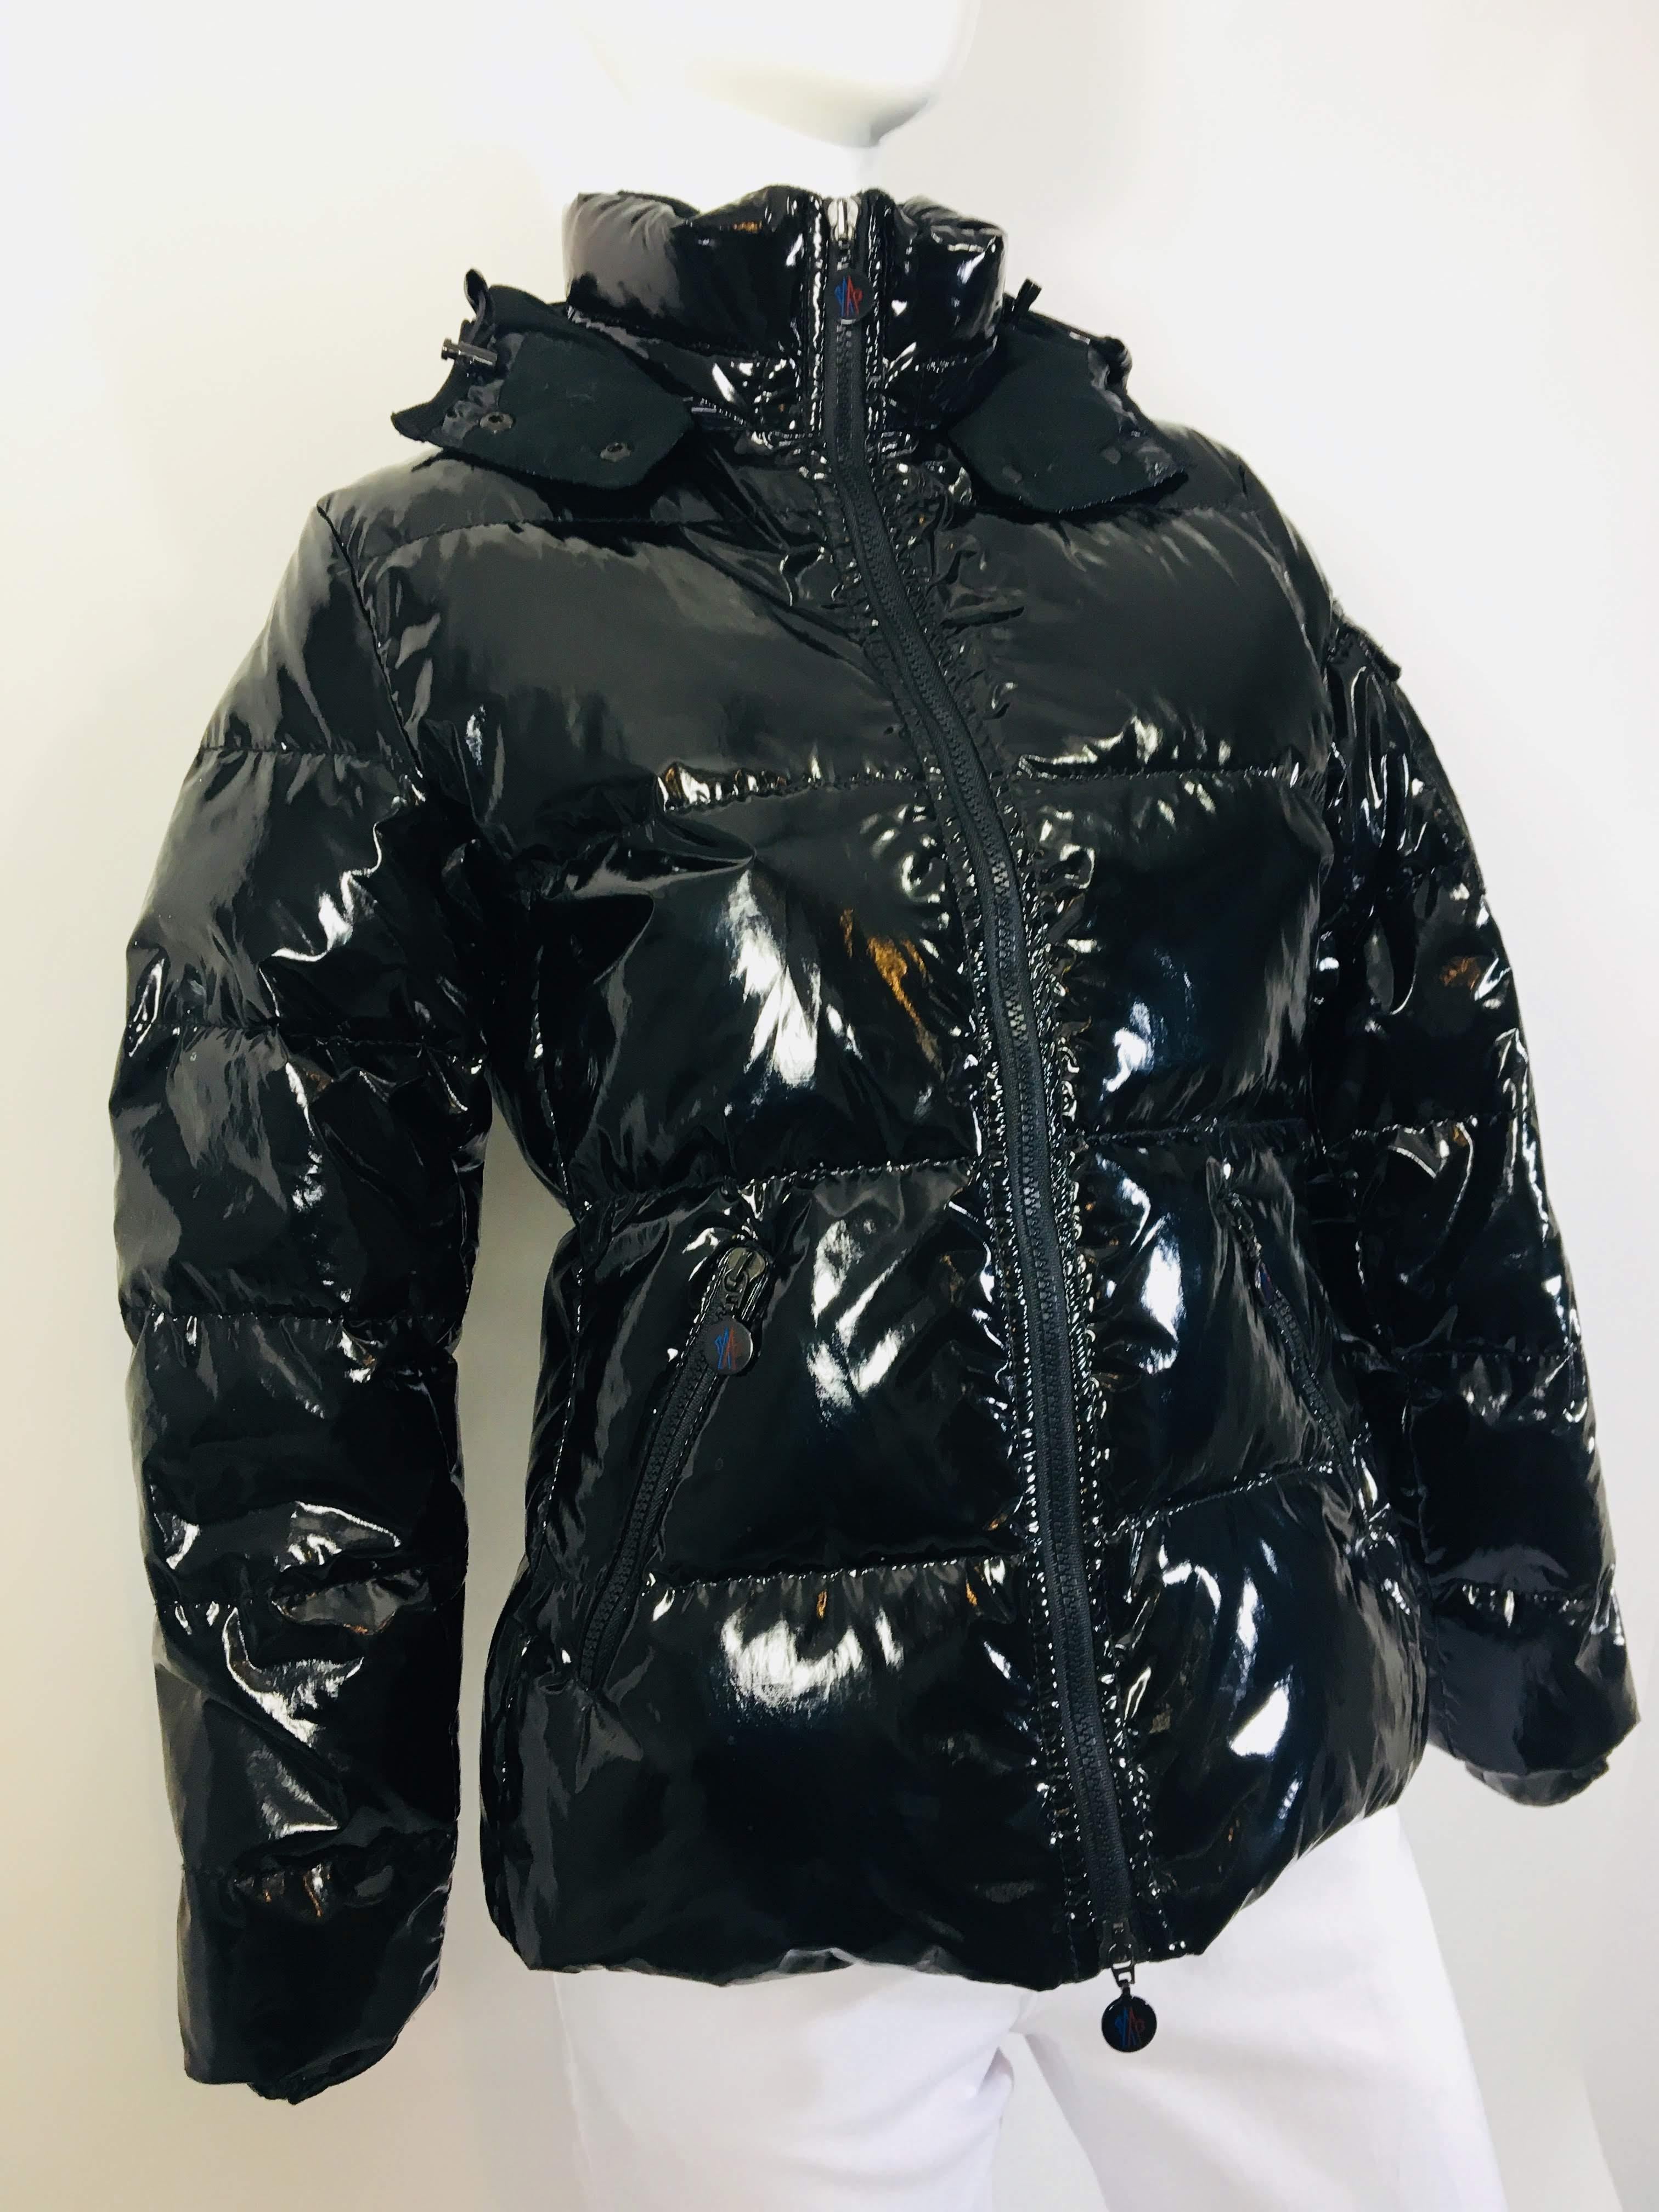 Moncler Shiny Puffer Jacket in Black Cotton & Polyester
Hooded
Two-Way Zip
Sleeve Velcro Pocket with Moncler Logo Patch
Two Zippered Pockets at Waist
Moncler size 1